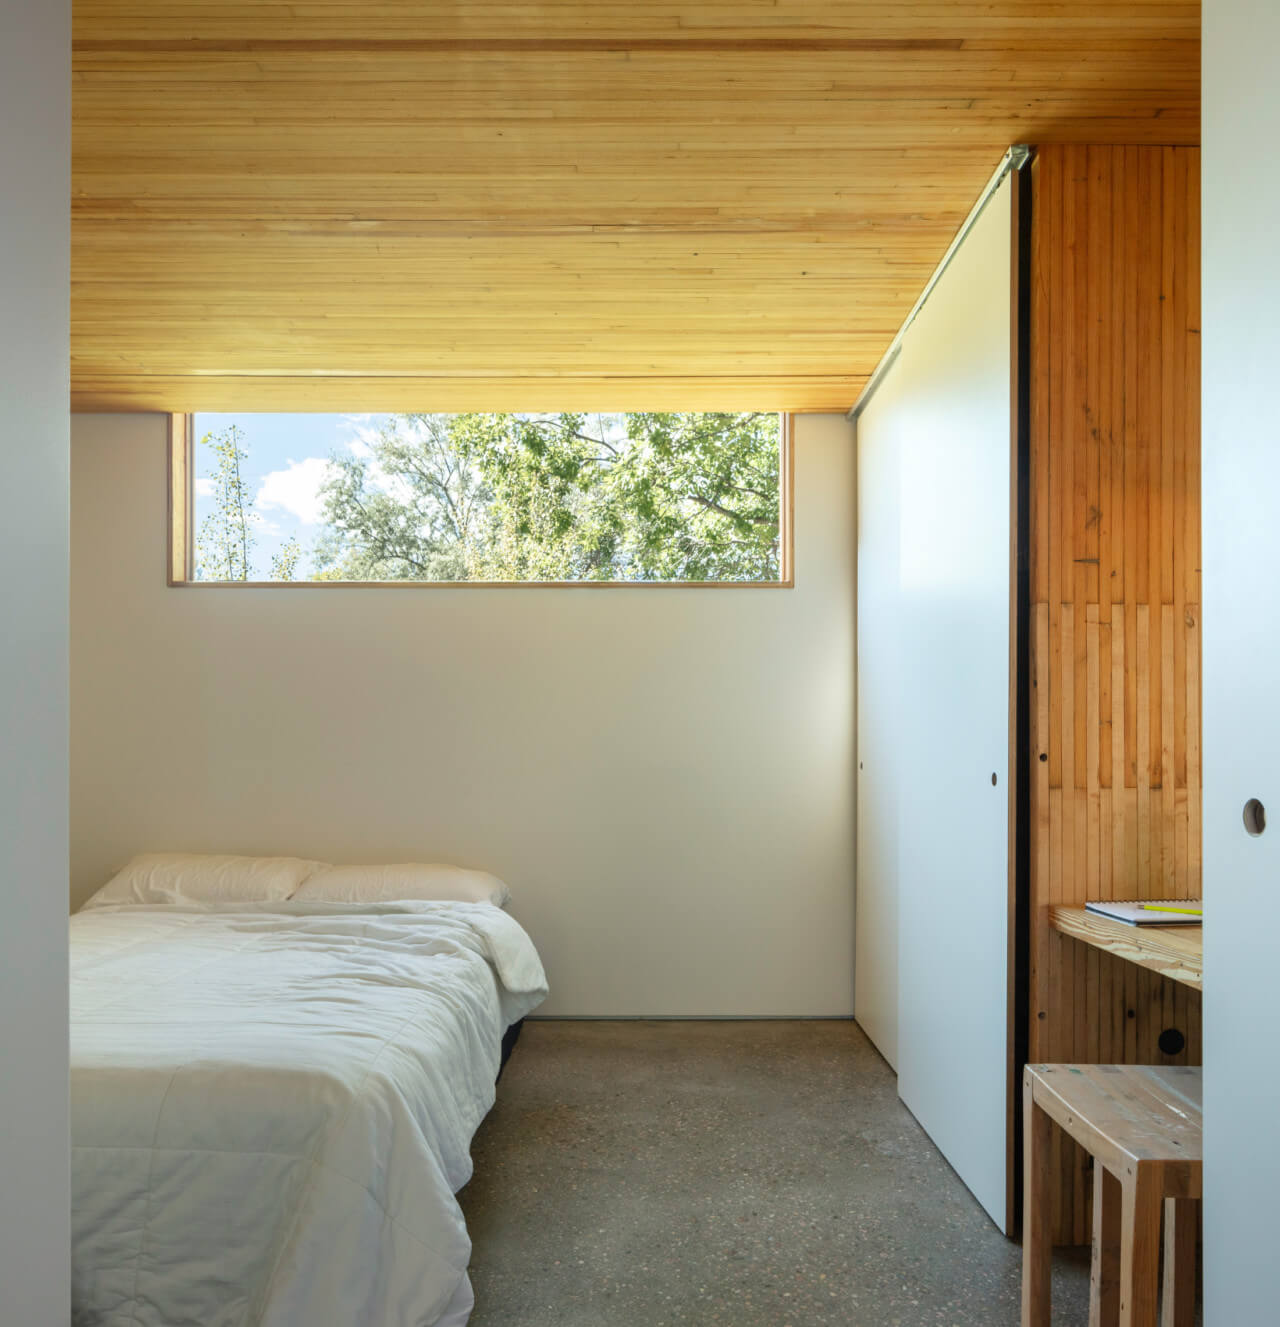 A bedroom in a white room with timber ceiling